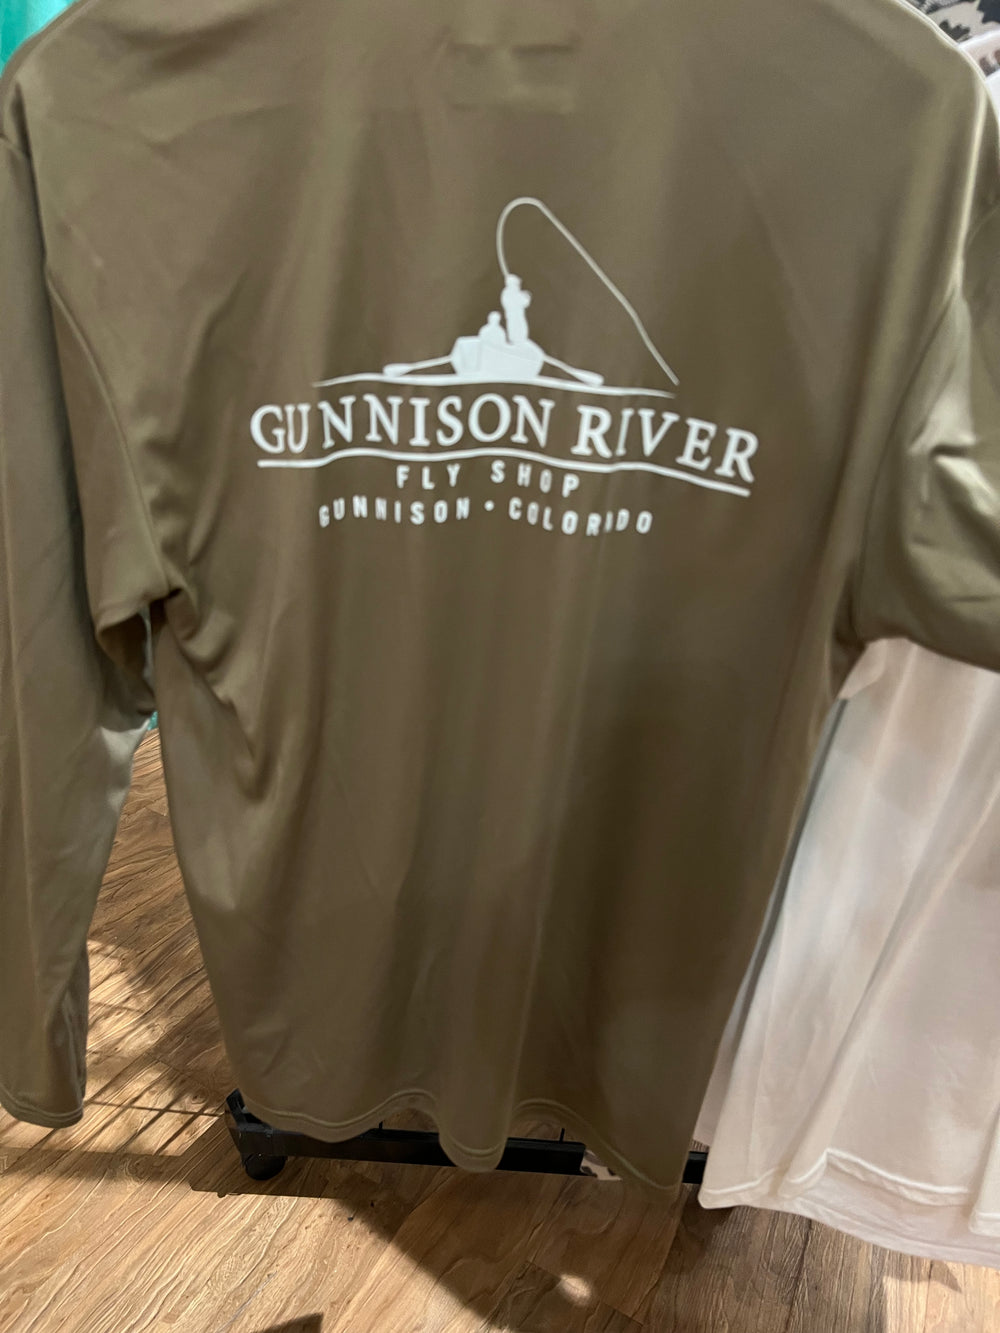 Clothing – Gunnison River Fly Shop